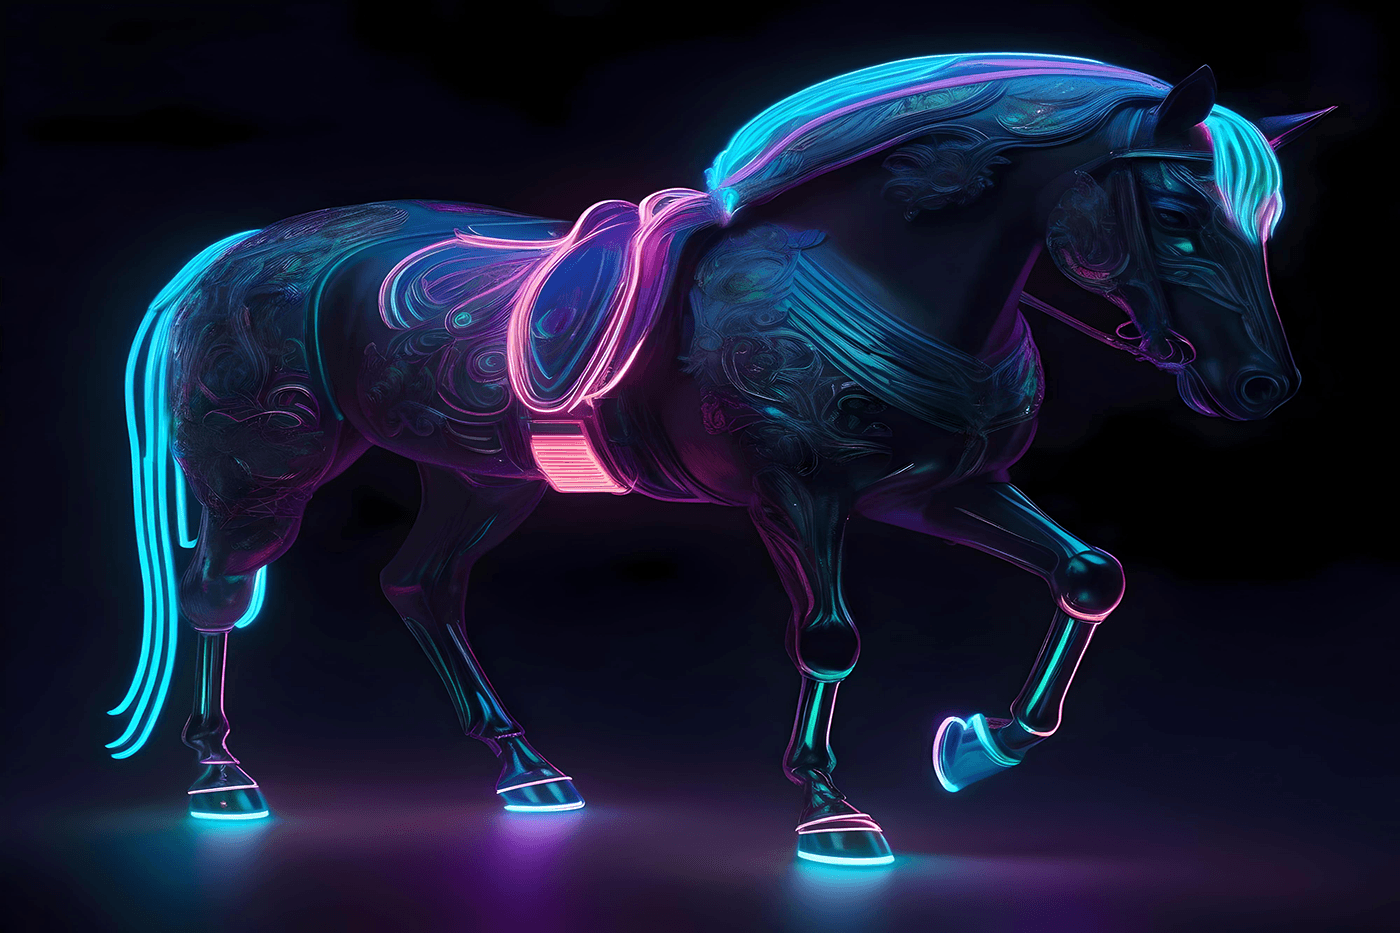 This is an amazing bioluminescent neon horse.